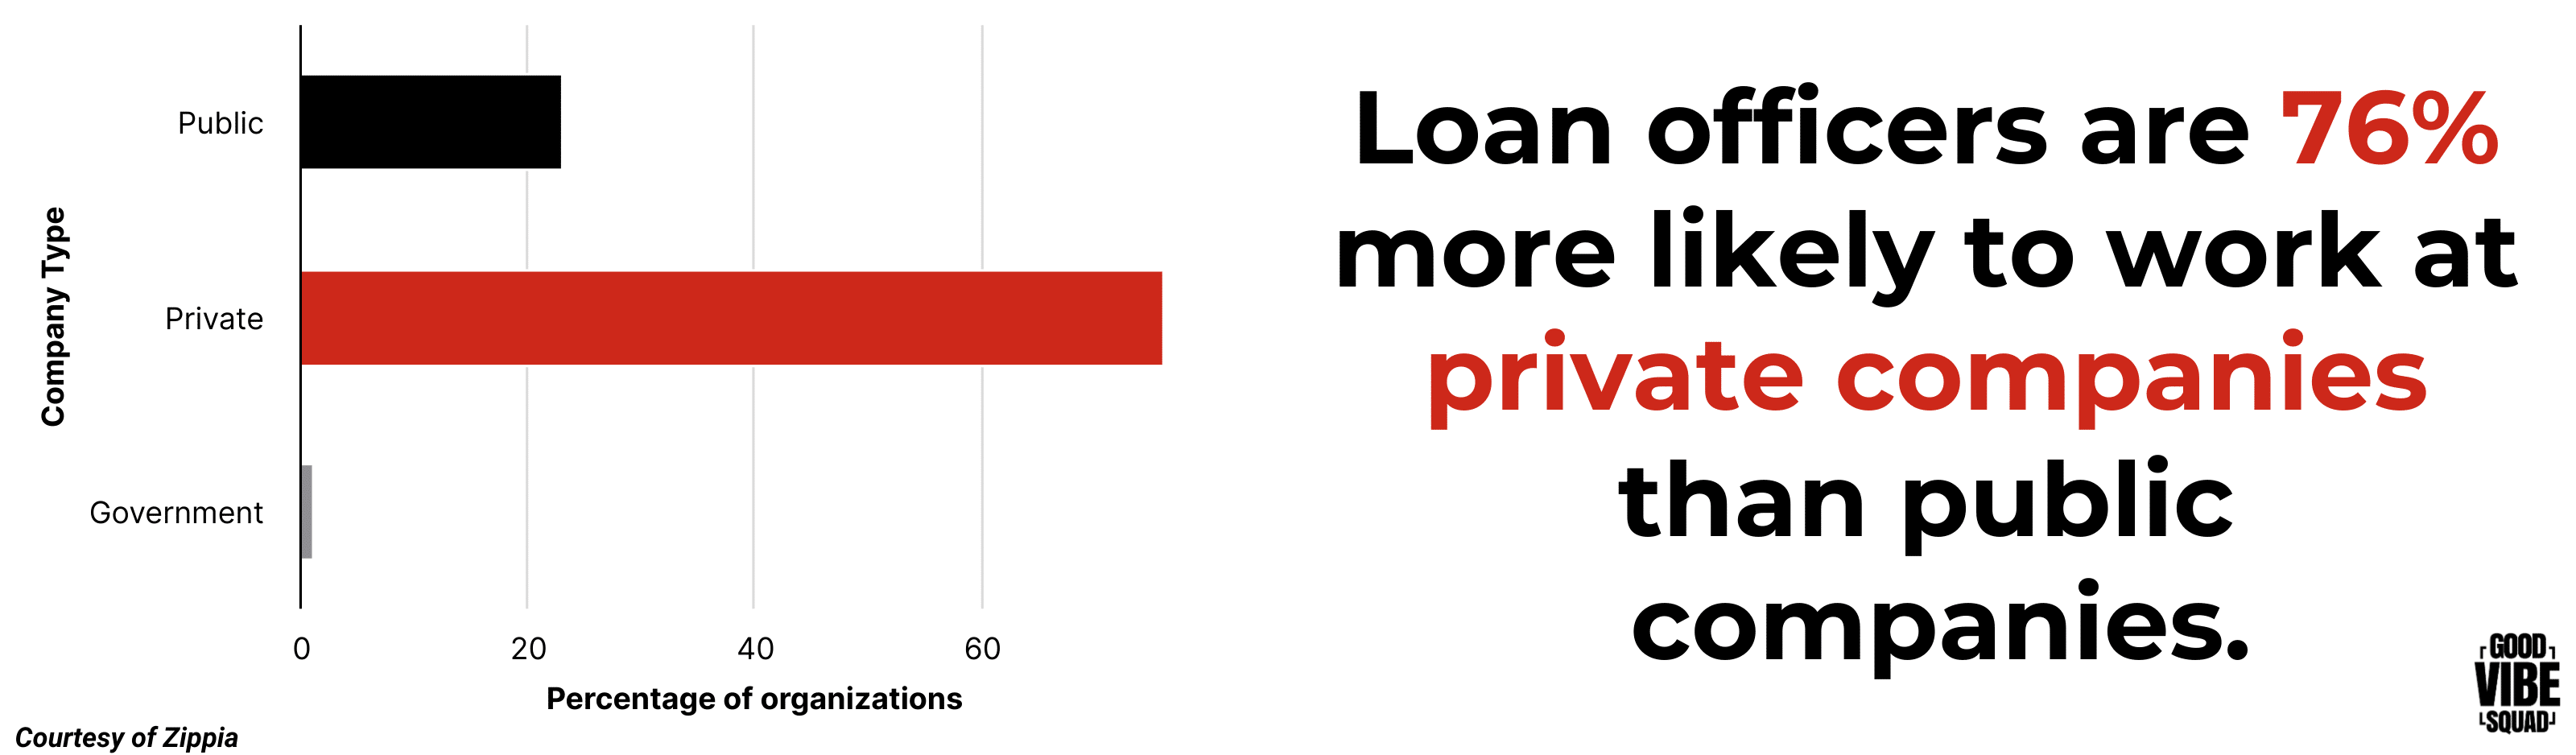 a graphic displaying that 76% of loan officers work at private companies compared to public companies